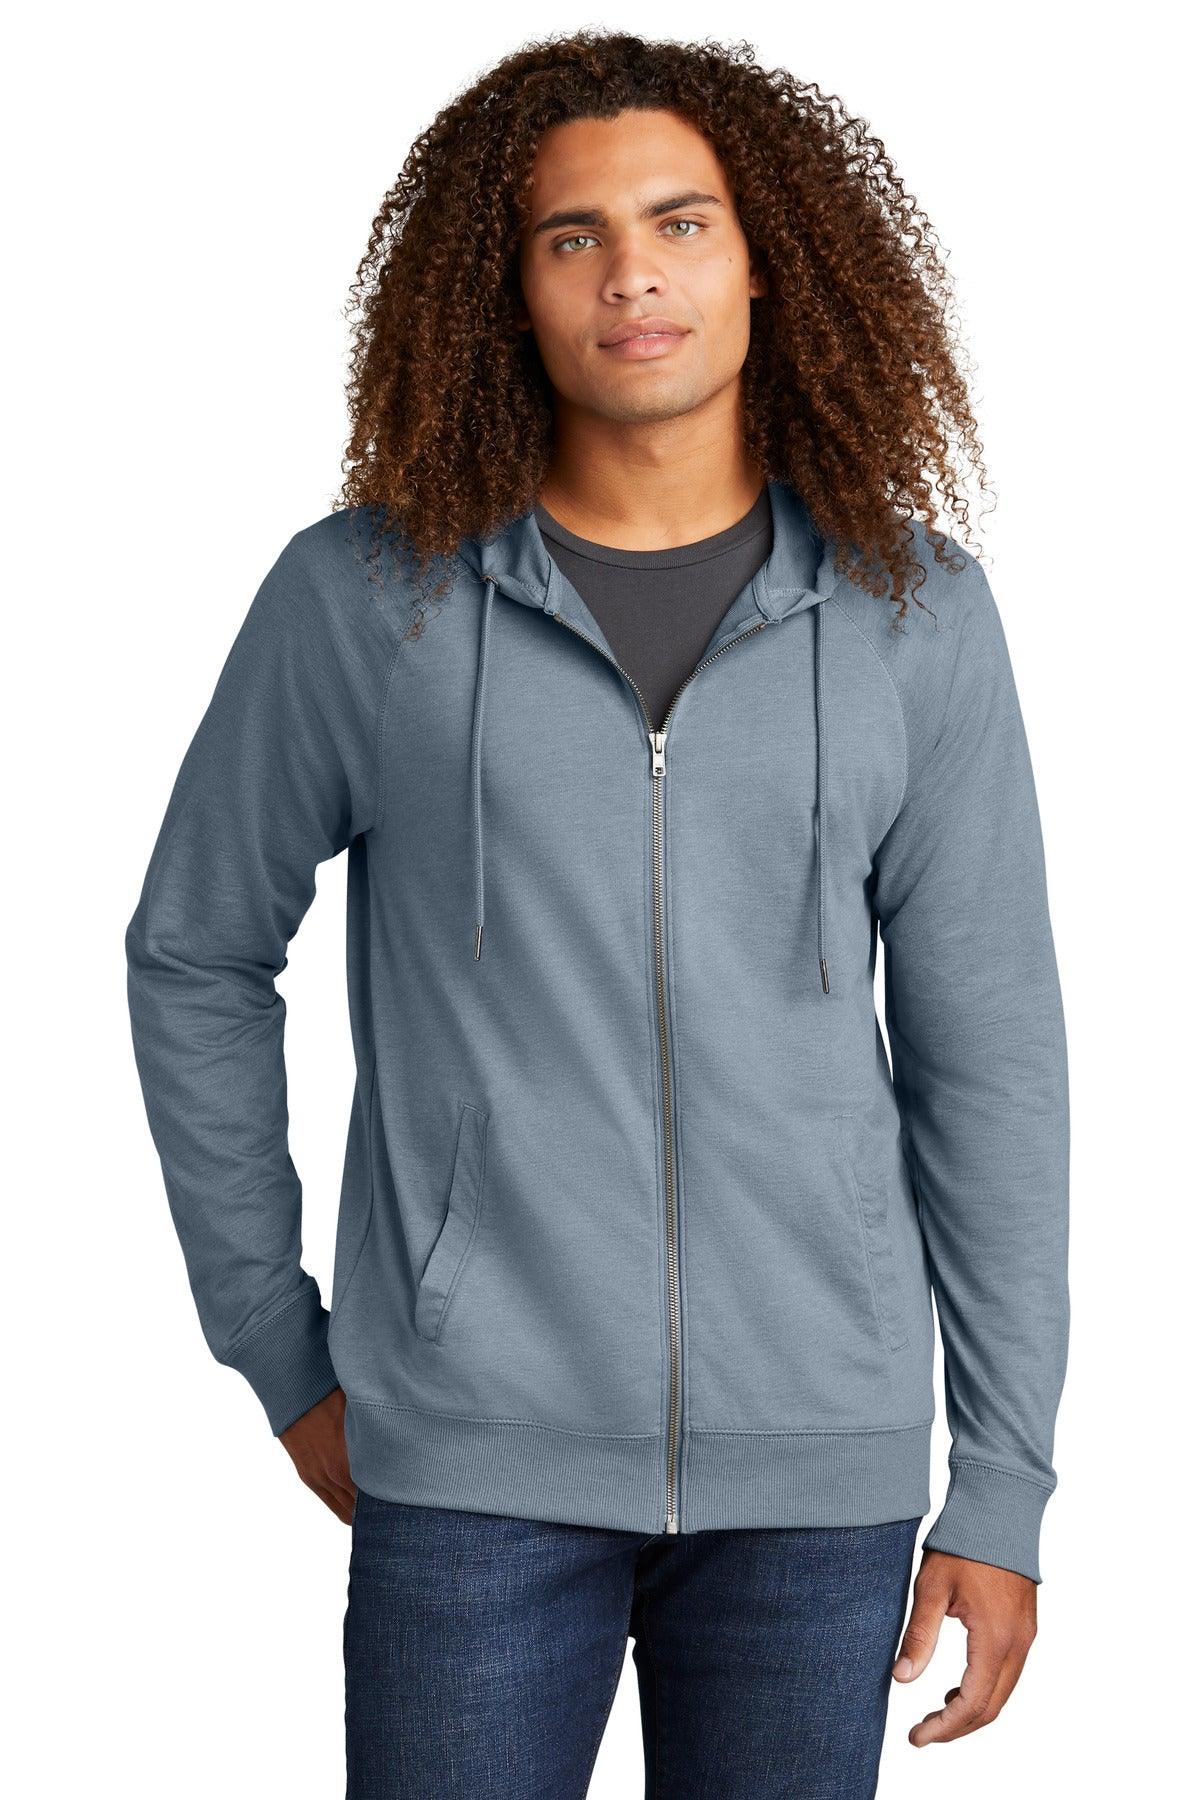 District Featherweight French Terry Full-Zip Hoodie DT573 - Dresses Max